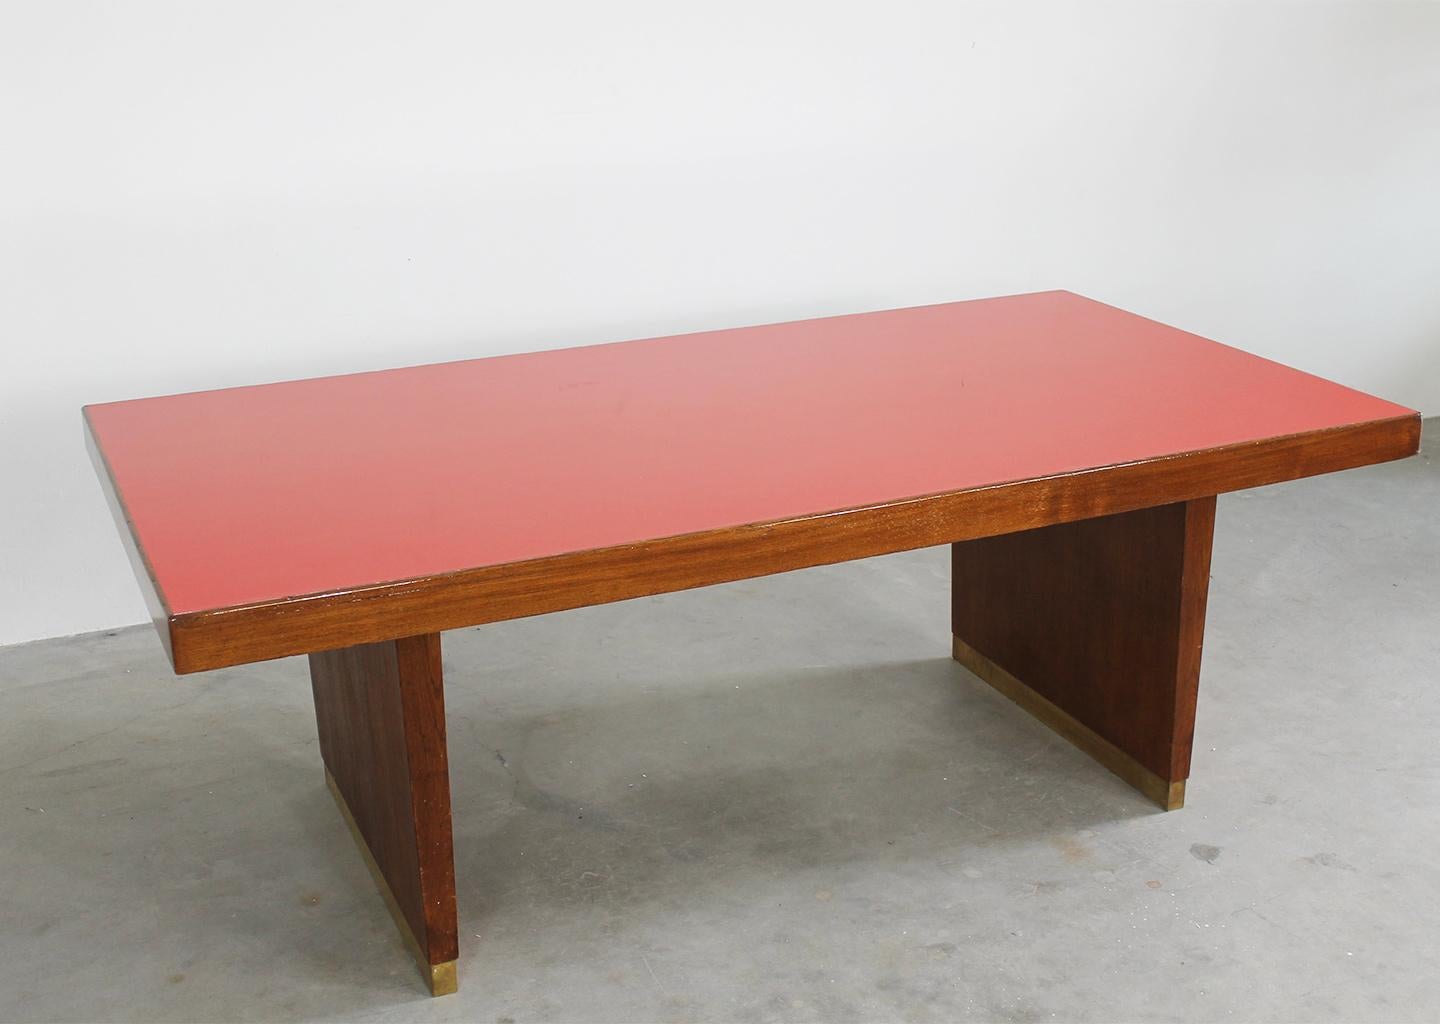 Mid-20th Century Gio Ponti Table in Oak Brass and Red Laminate Italian Manifacture 1950s For Sale